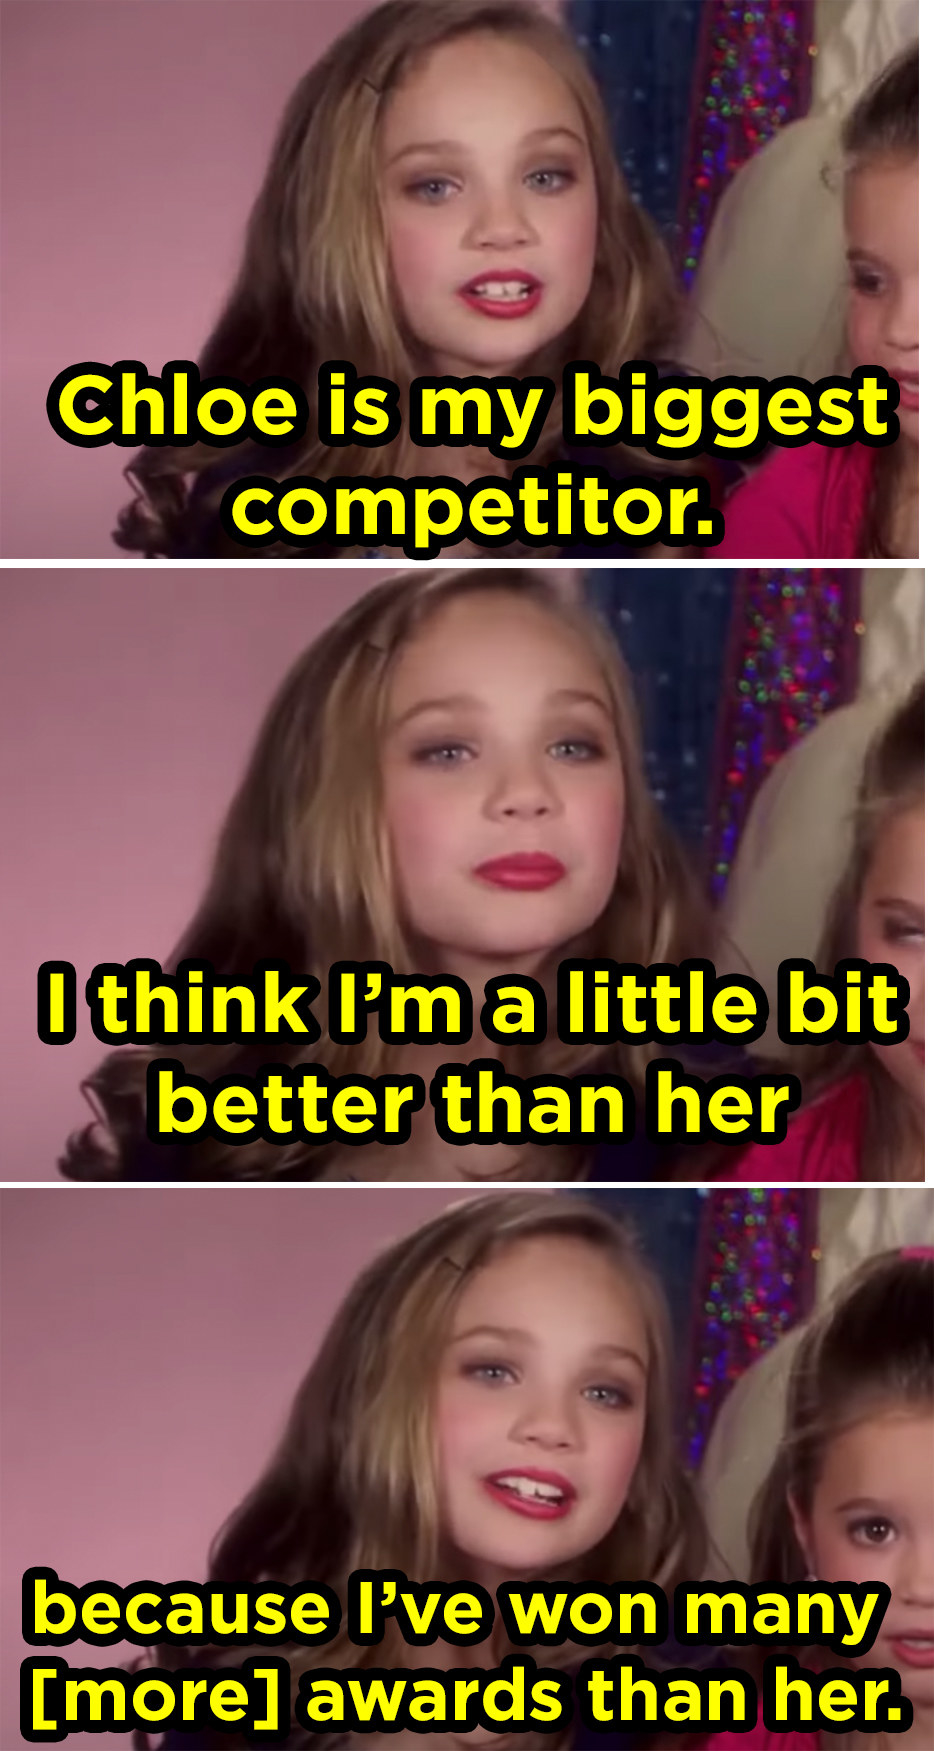 a young girl about 7 years of age sits down in front of a camera saying &quot;chloe is my biggest competition, i think i&#x27;m a little bit better than her because I&#x27;ve won more awards than her&quot;